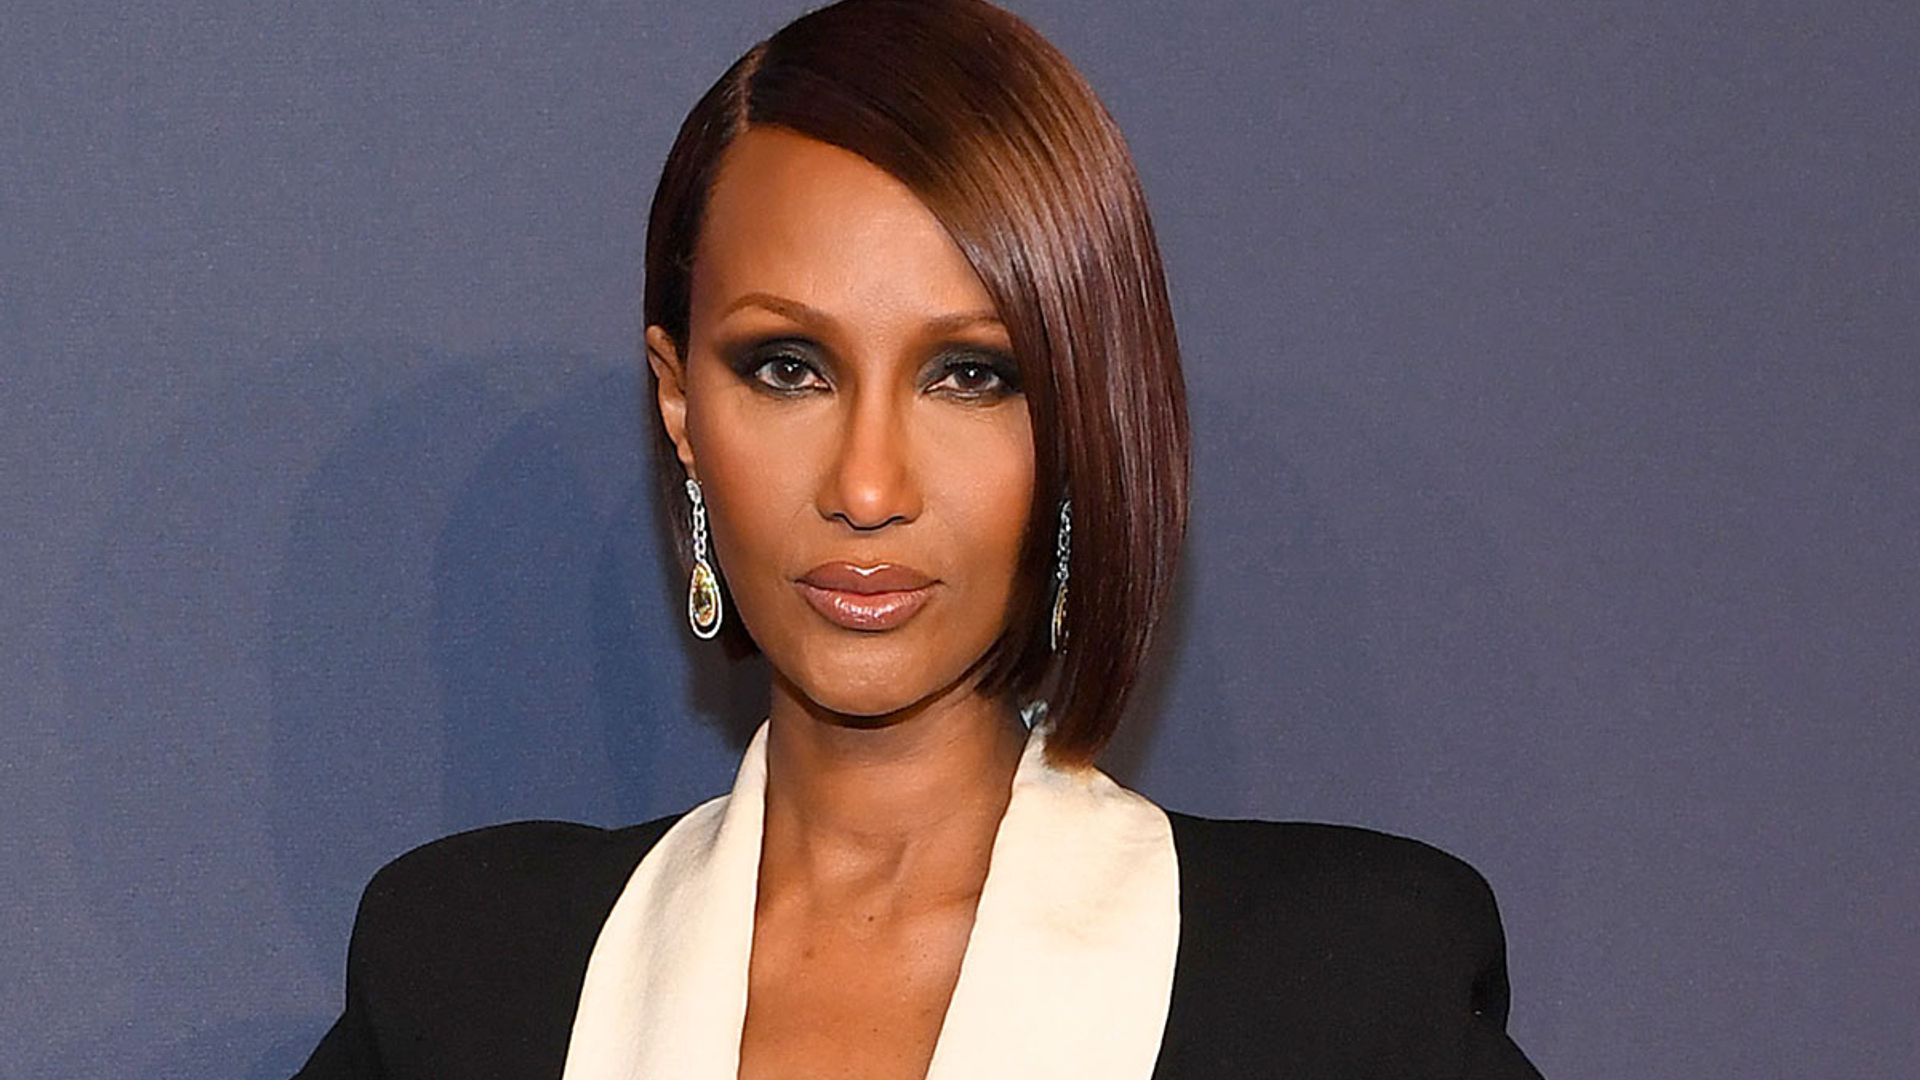 Iman shows off loving tribute to husband David Bowie – and shares rare look inside home